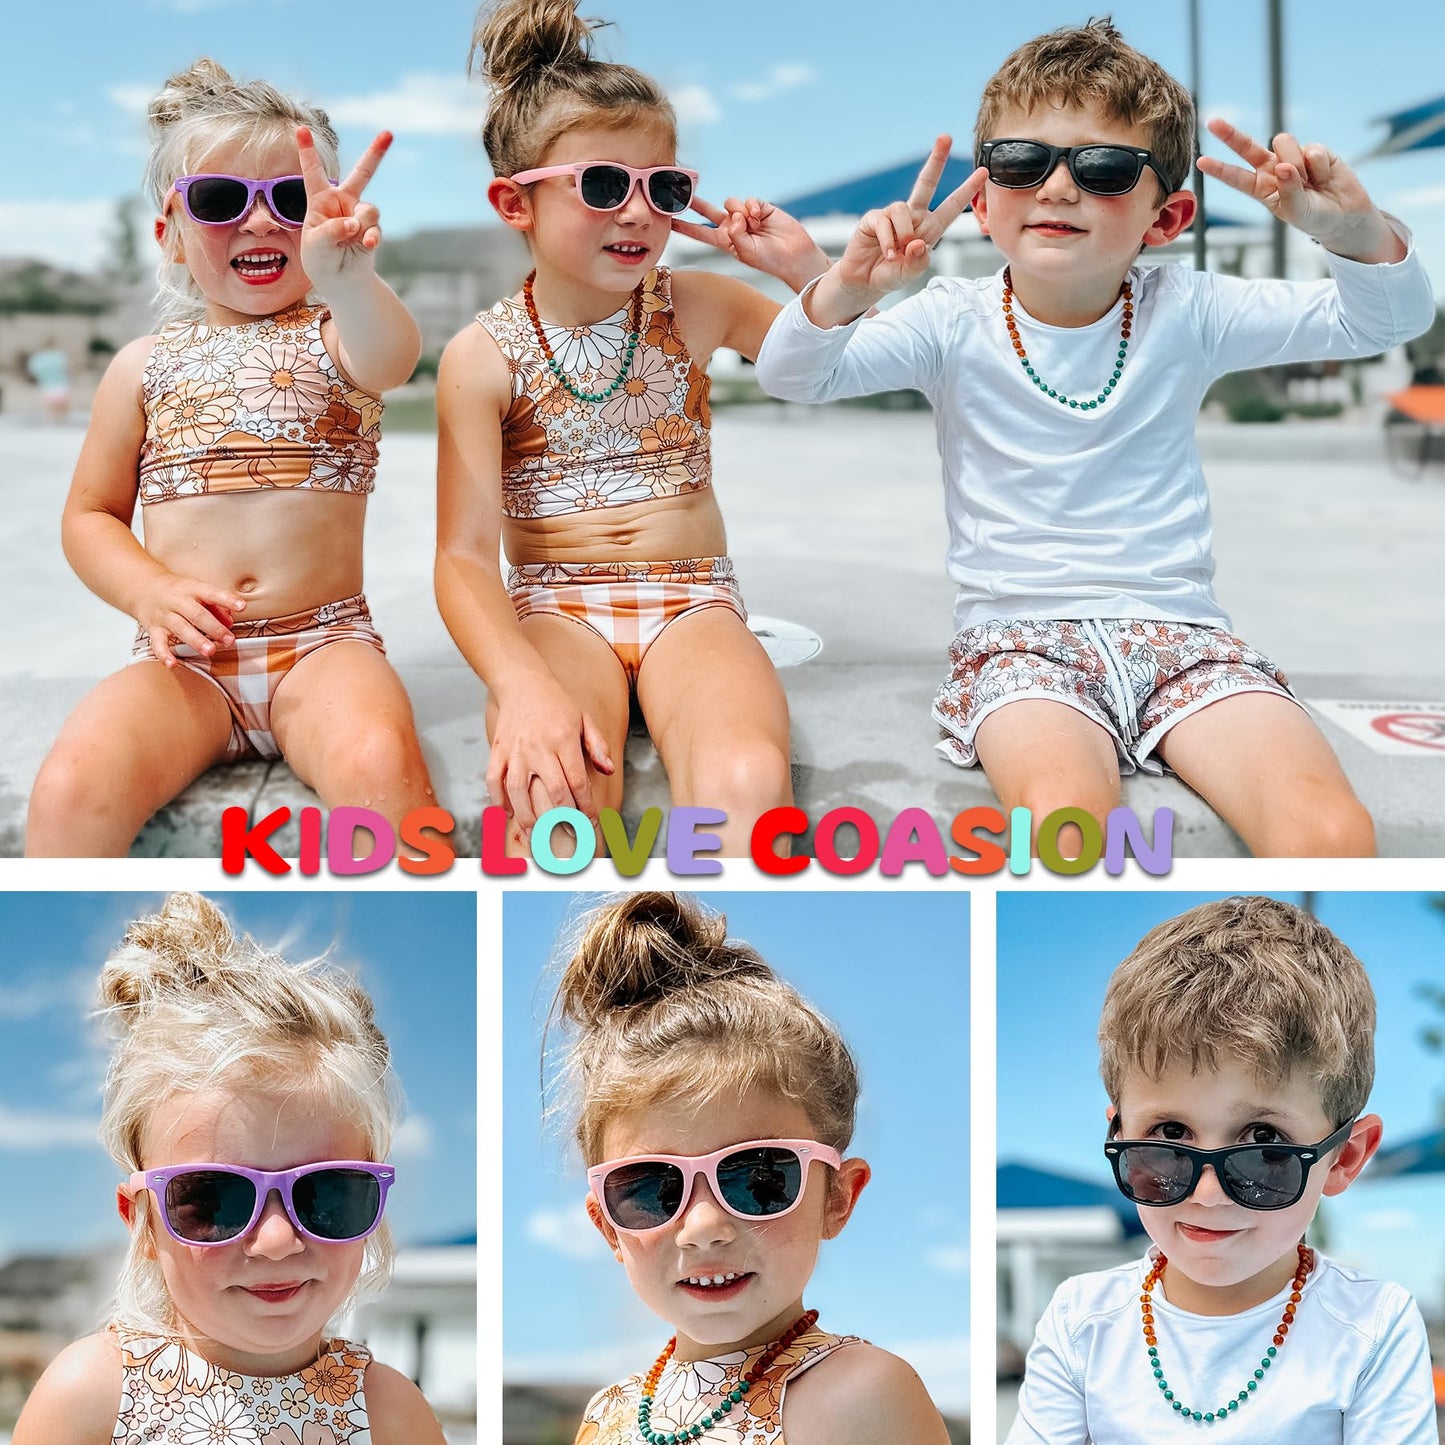 COASION Kids Polarized Sunglasses TPEE Rubber Flexible Shades for Girls Boys Age 3-9